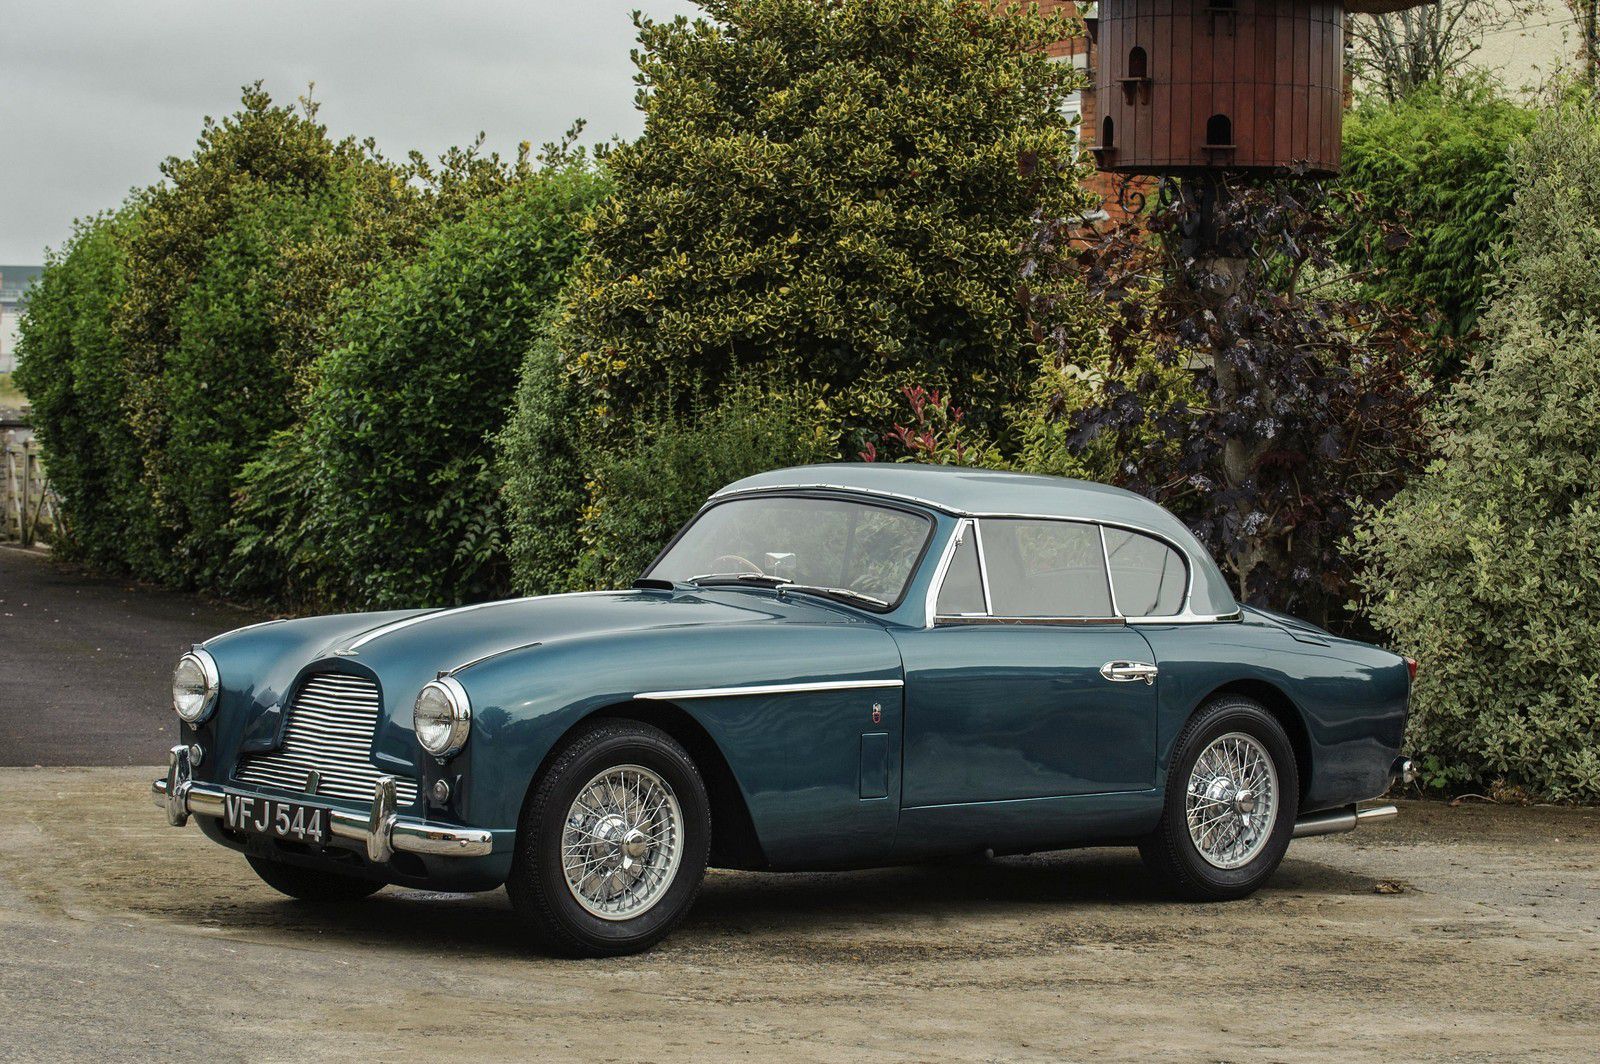 VOITURES DE LEGENDE (1136) : ASTON MARTIN  DB2/4 FIXED HEAD COUPE By TICKFORD - 1955